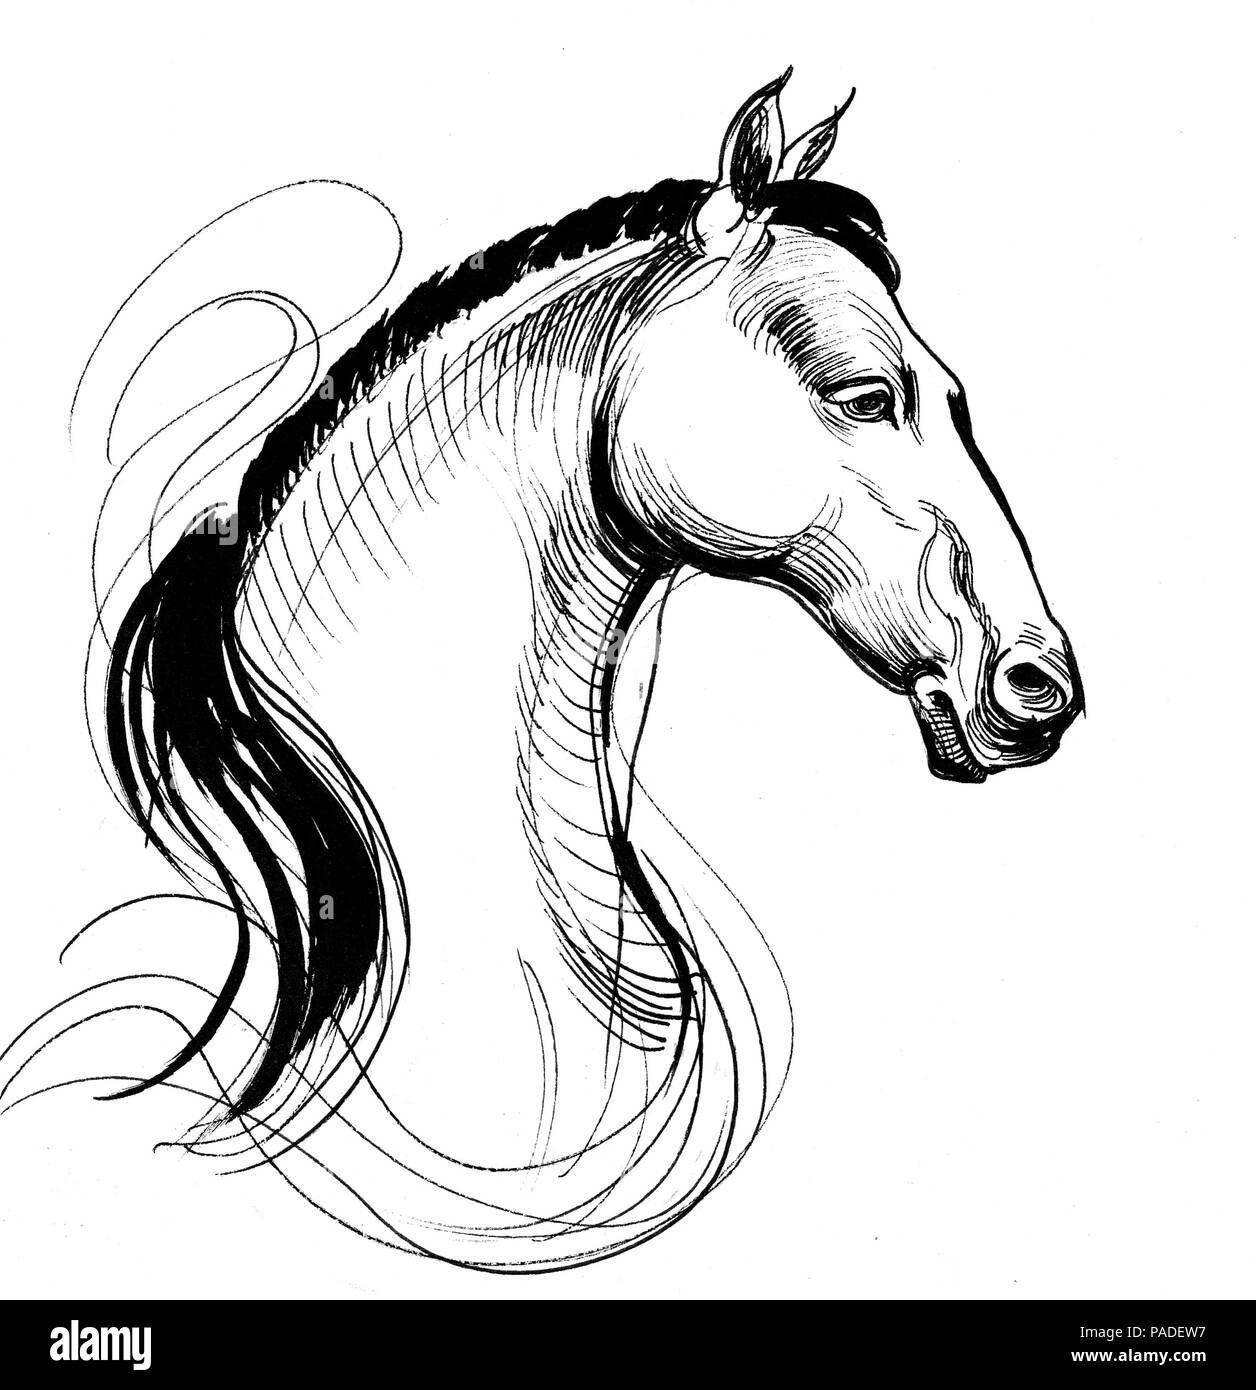 How to draw a horse step by step | Pencil Shading Drawing - YouTube